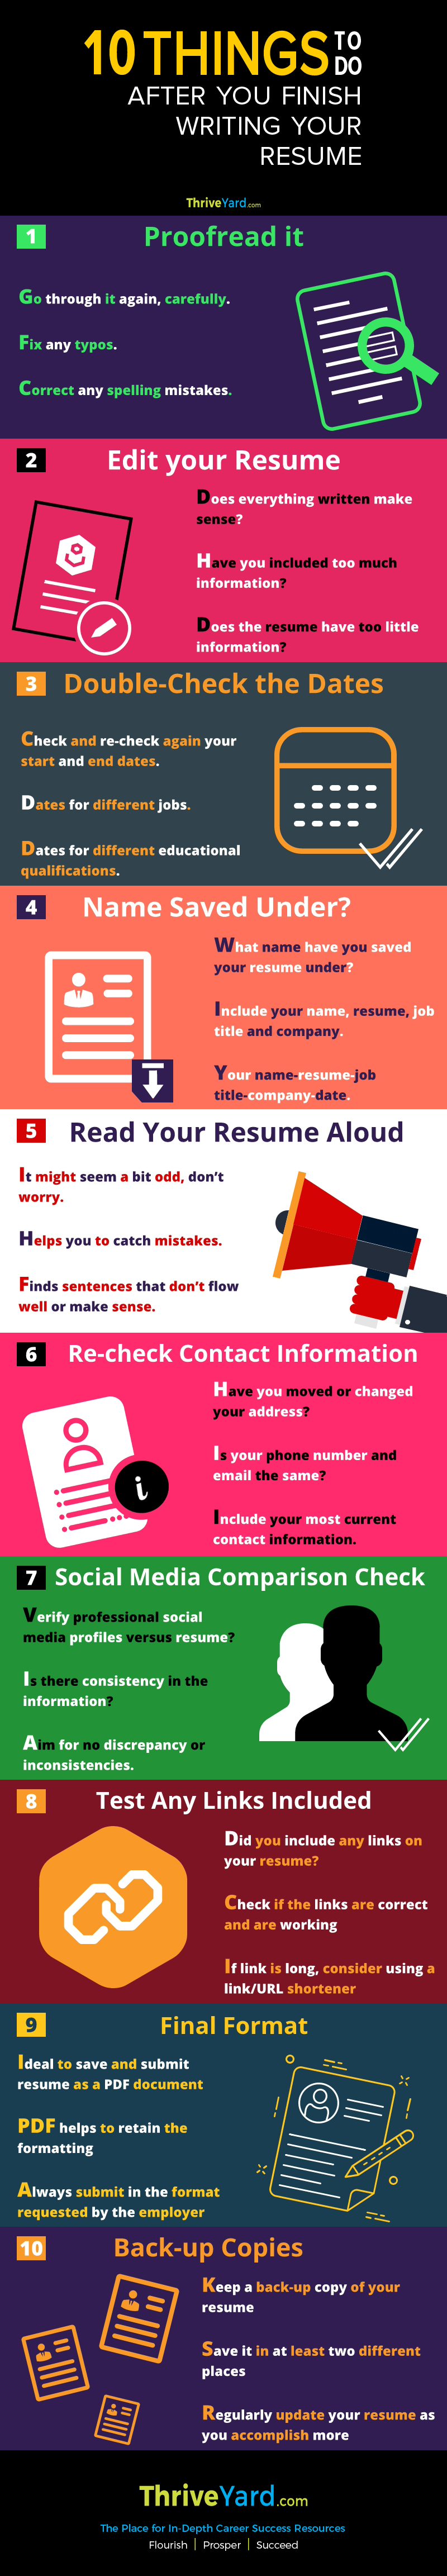 10 Things To Do After You Finish Writing Your Resume - Infographic